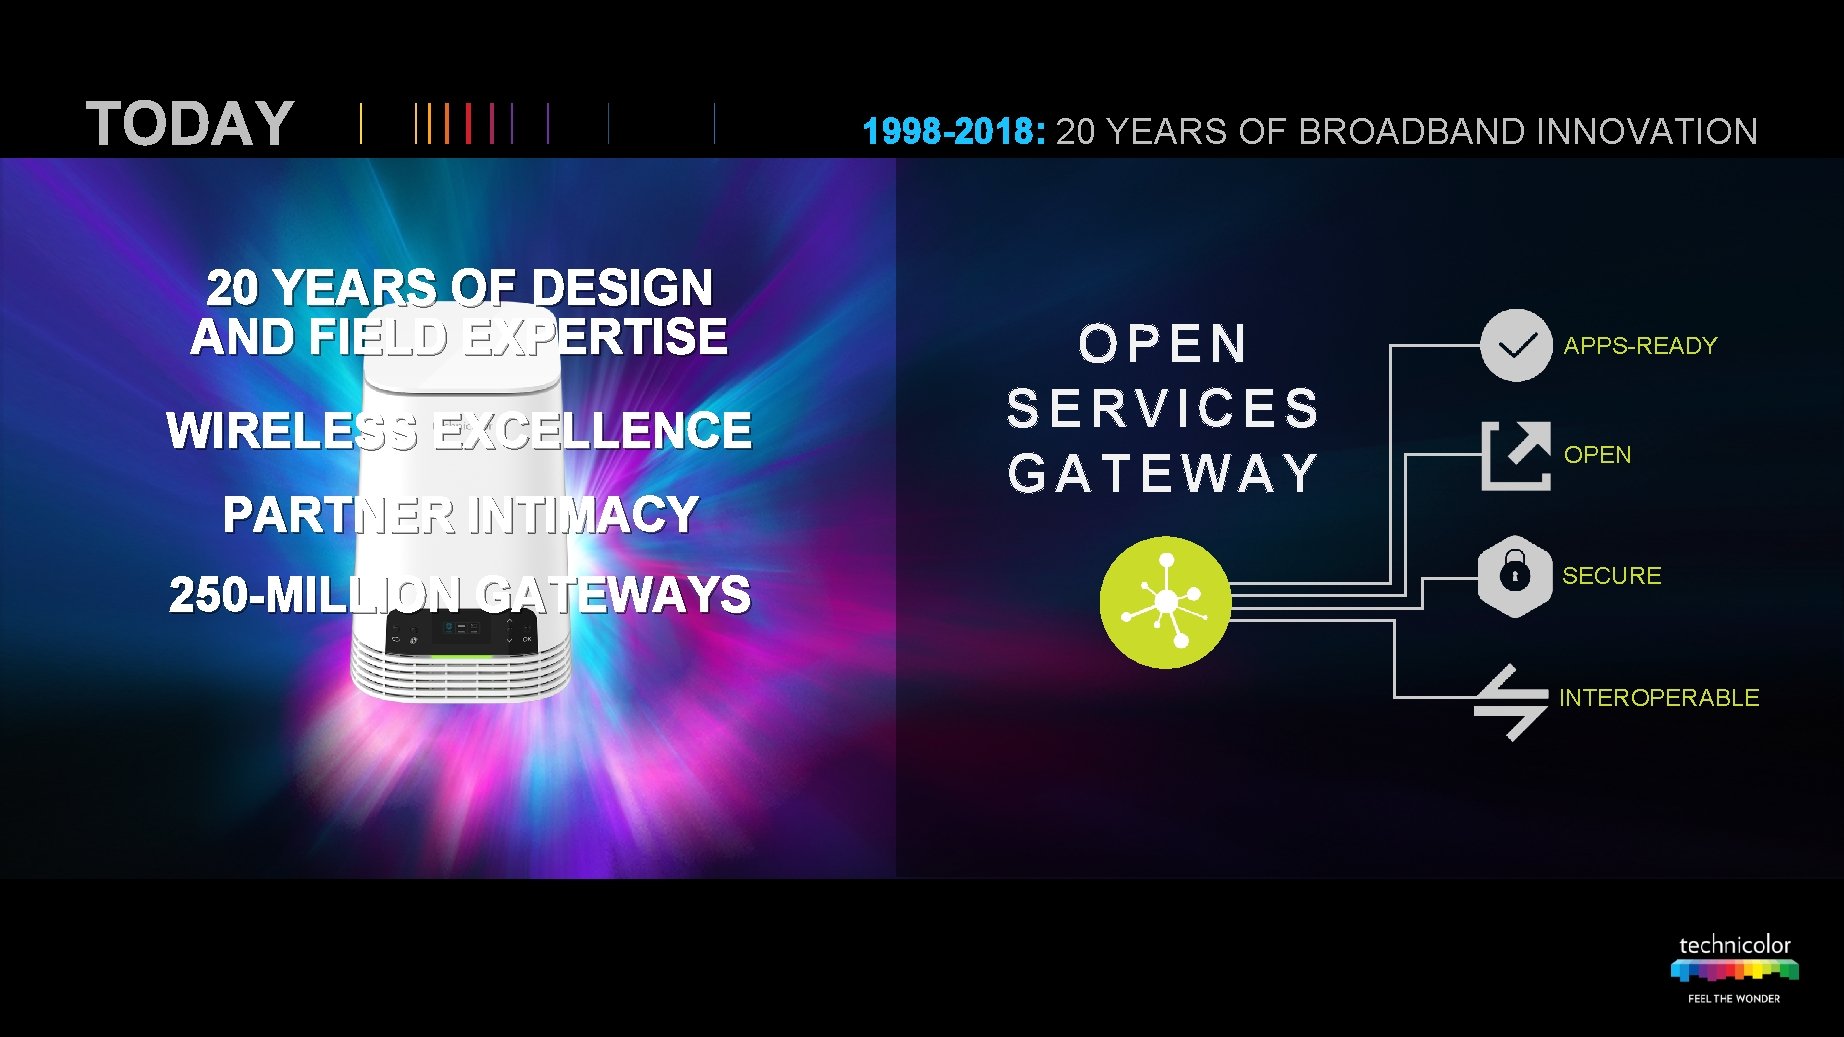 TODAY 20 YEARS OF DESIGN AND FIELD EXPERTISE WIRELESS EXCELLENCE PARTNER INTIMACY 250 -MILLION